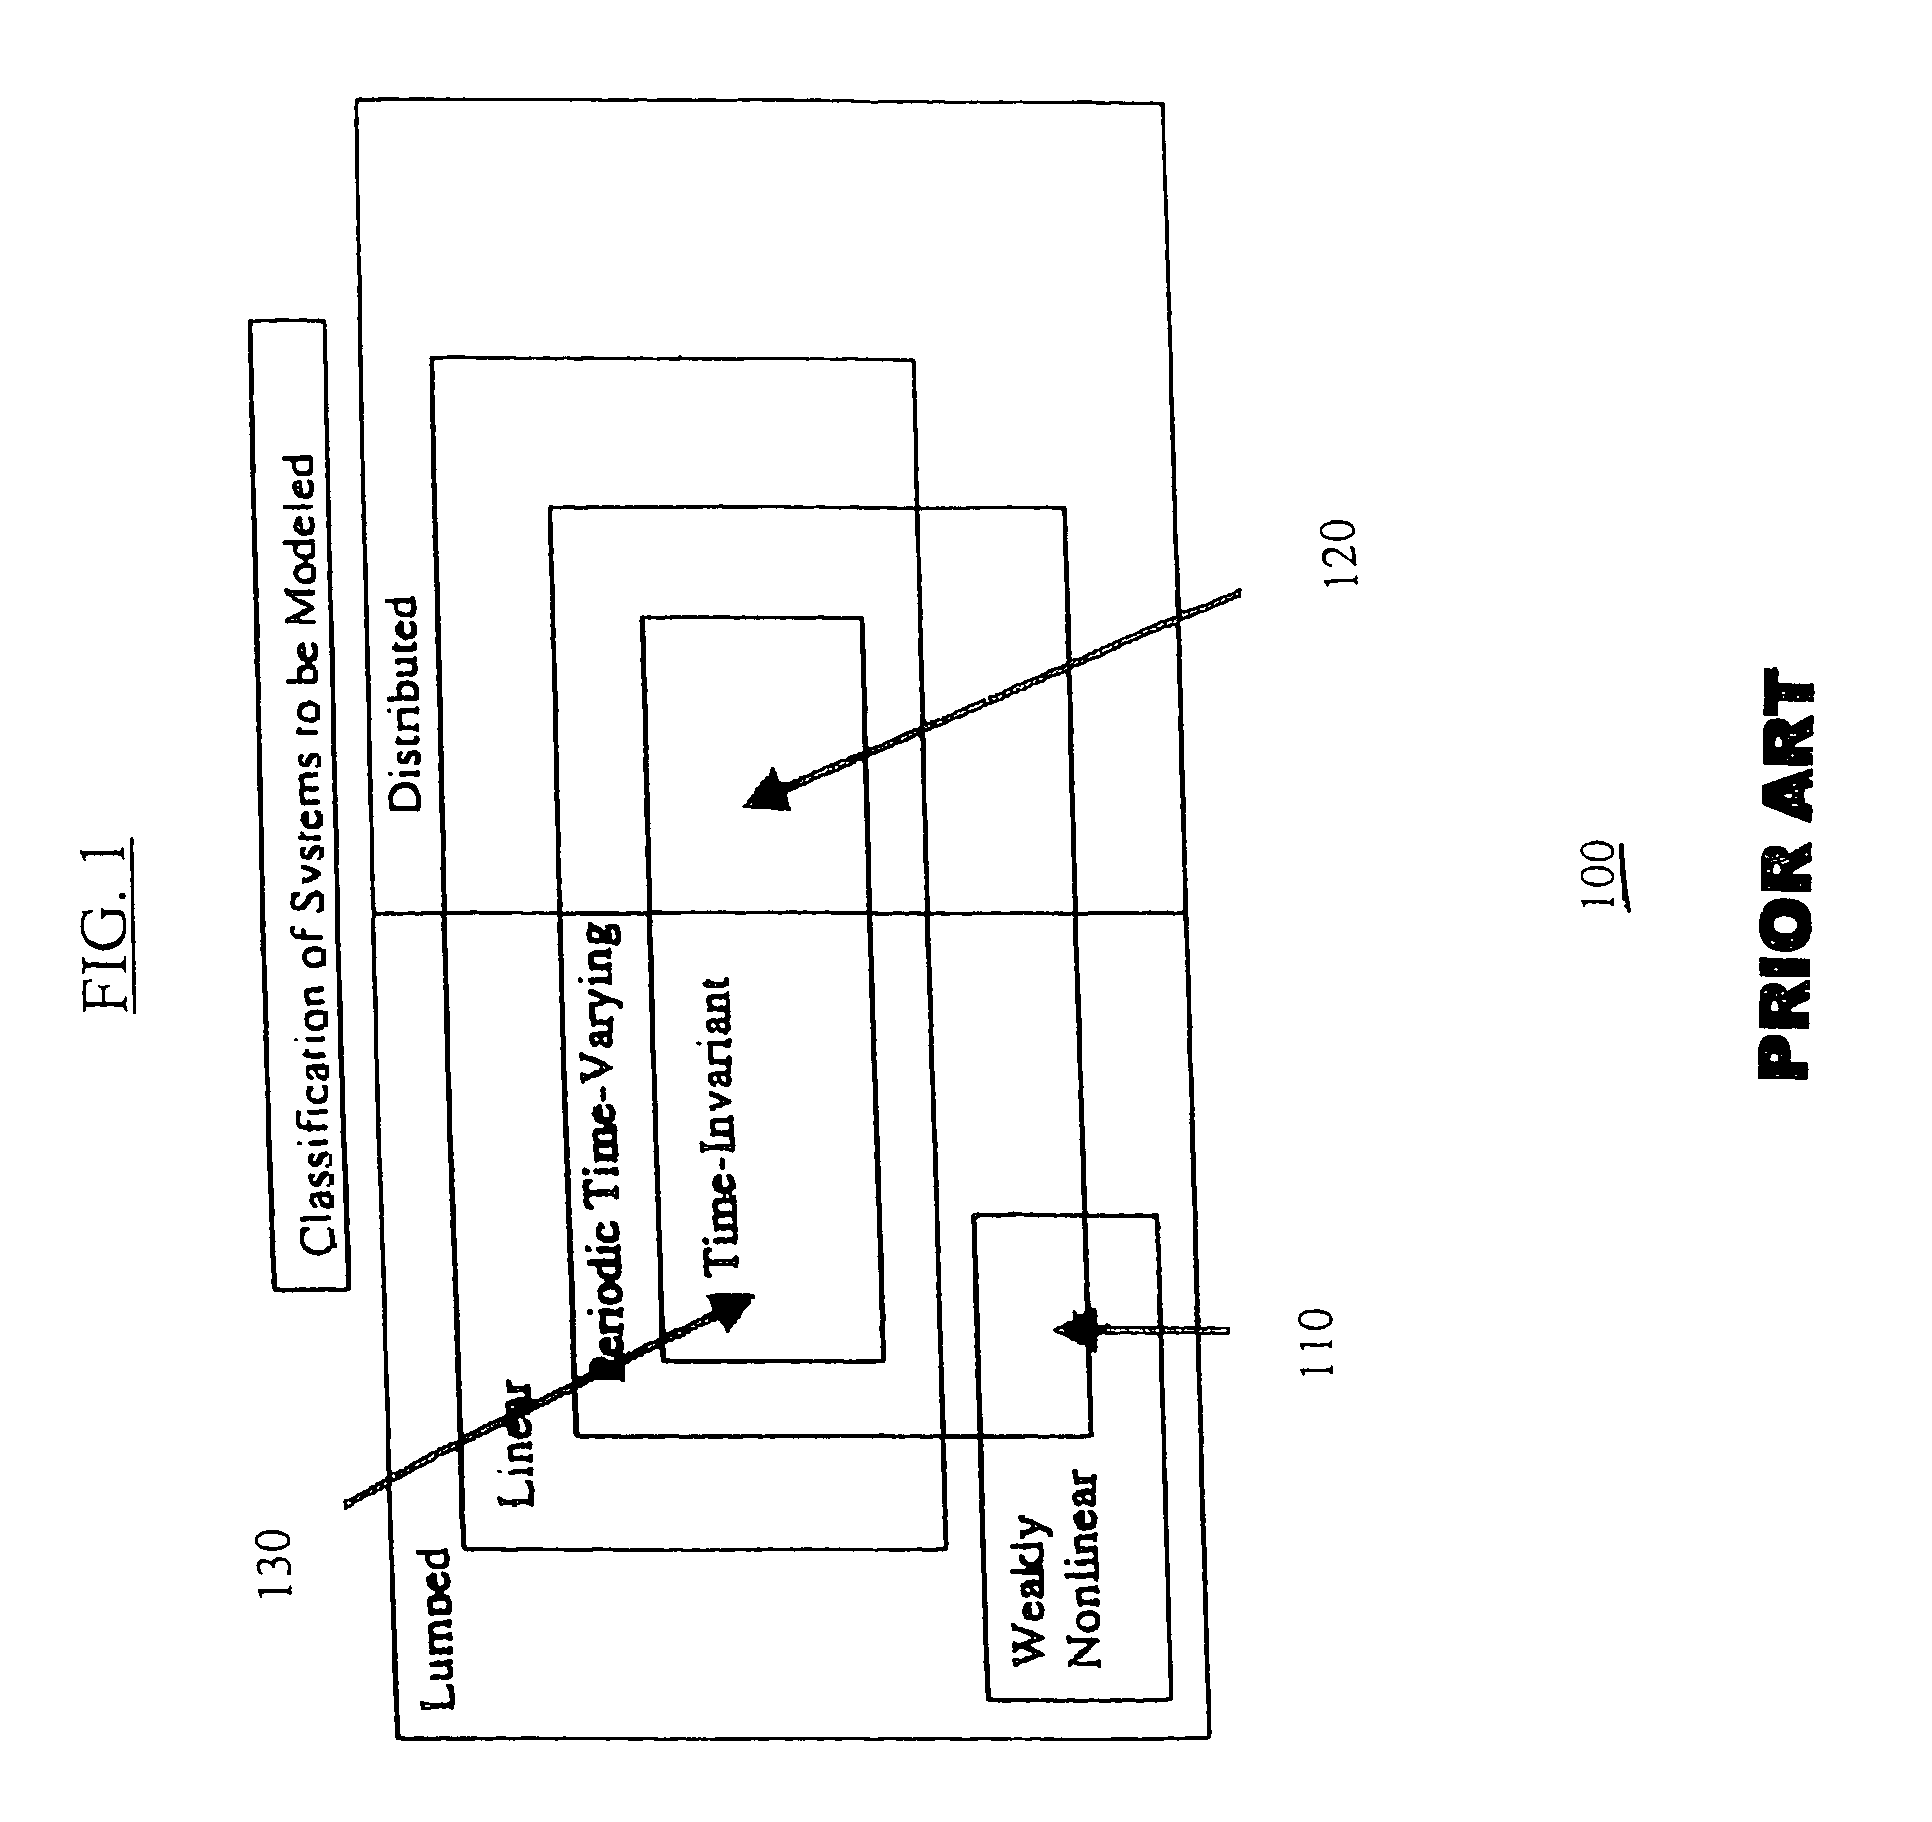 Method and system for modeling distributed time invariant systems